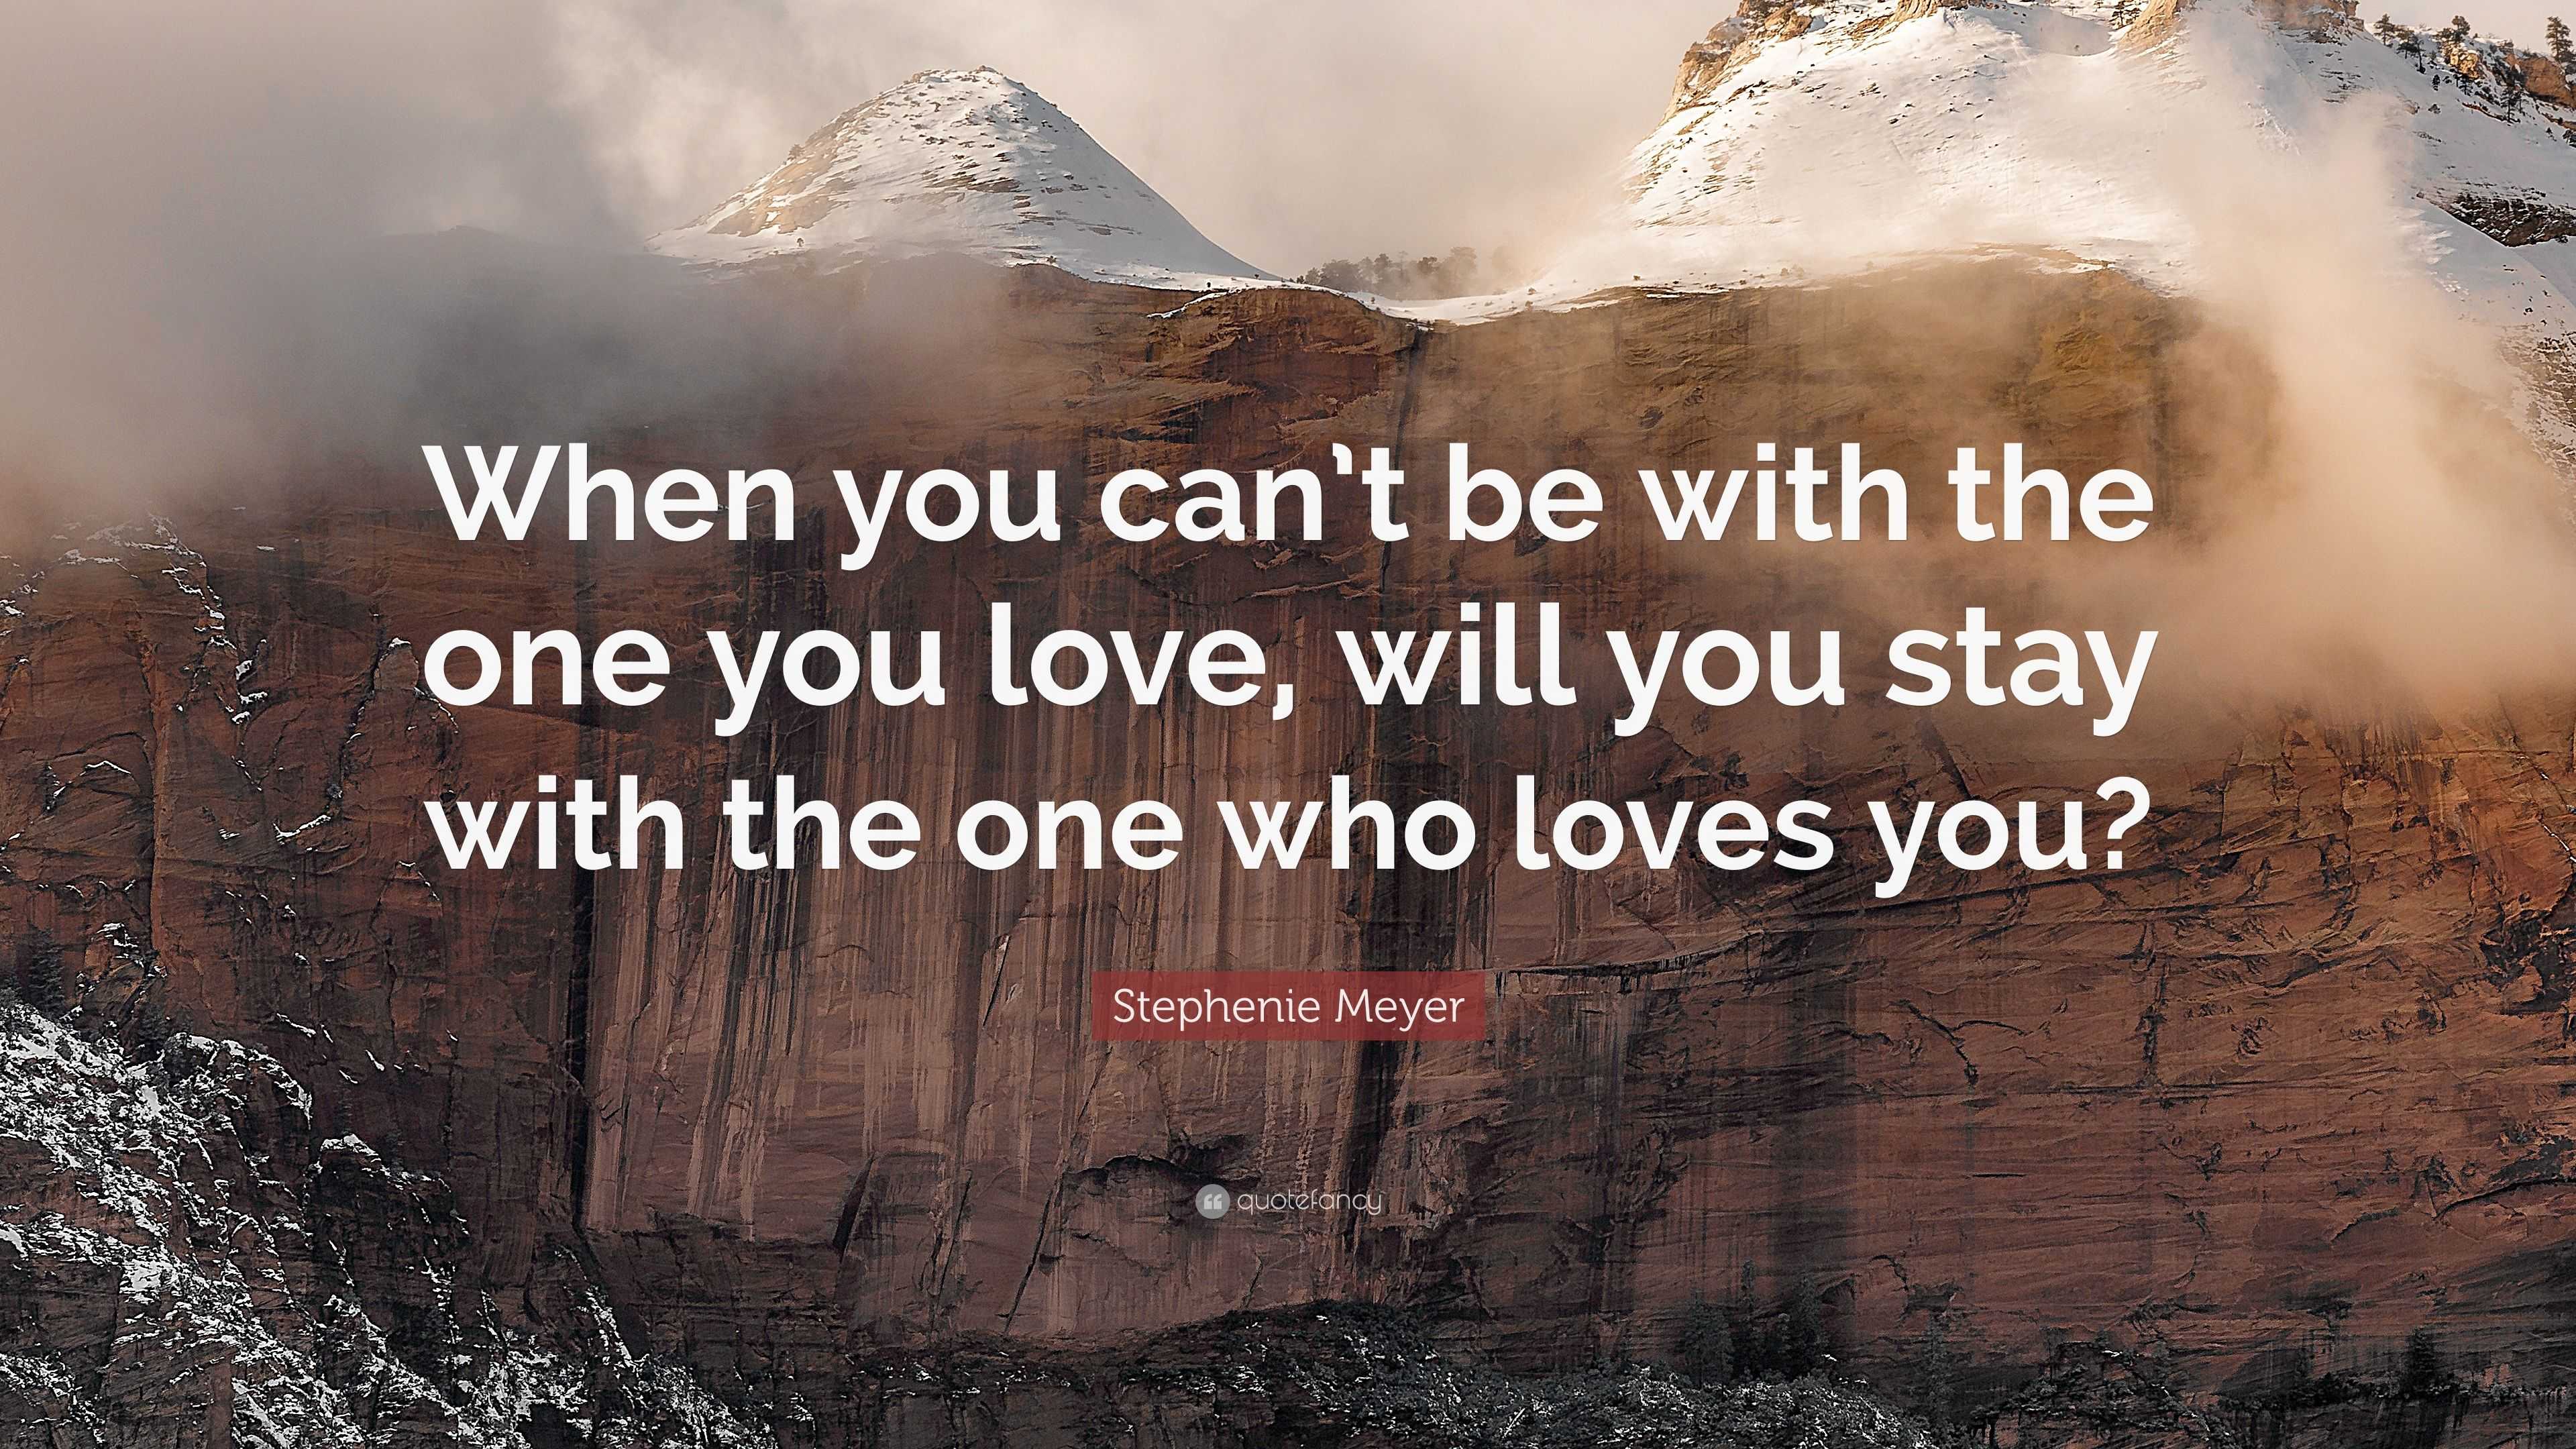 Stephenie Meyer Quote “When you can t be with the one you love